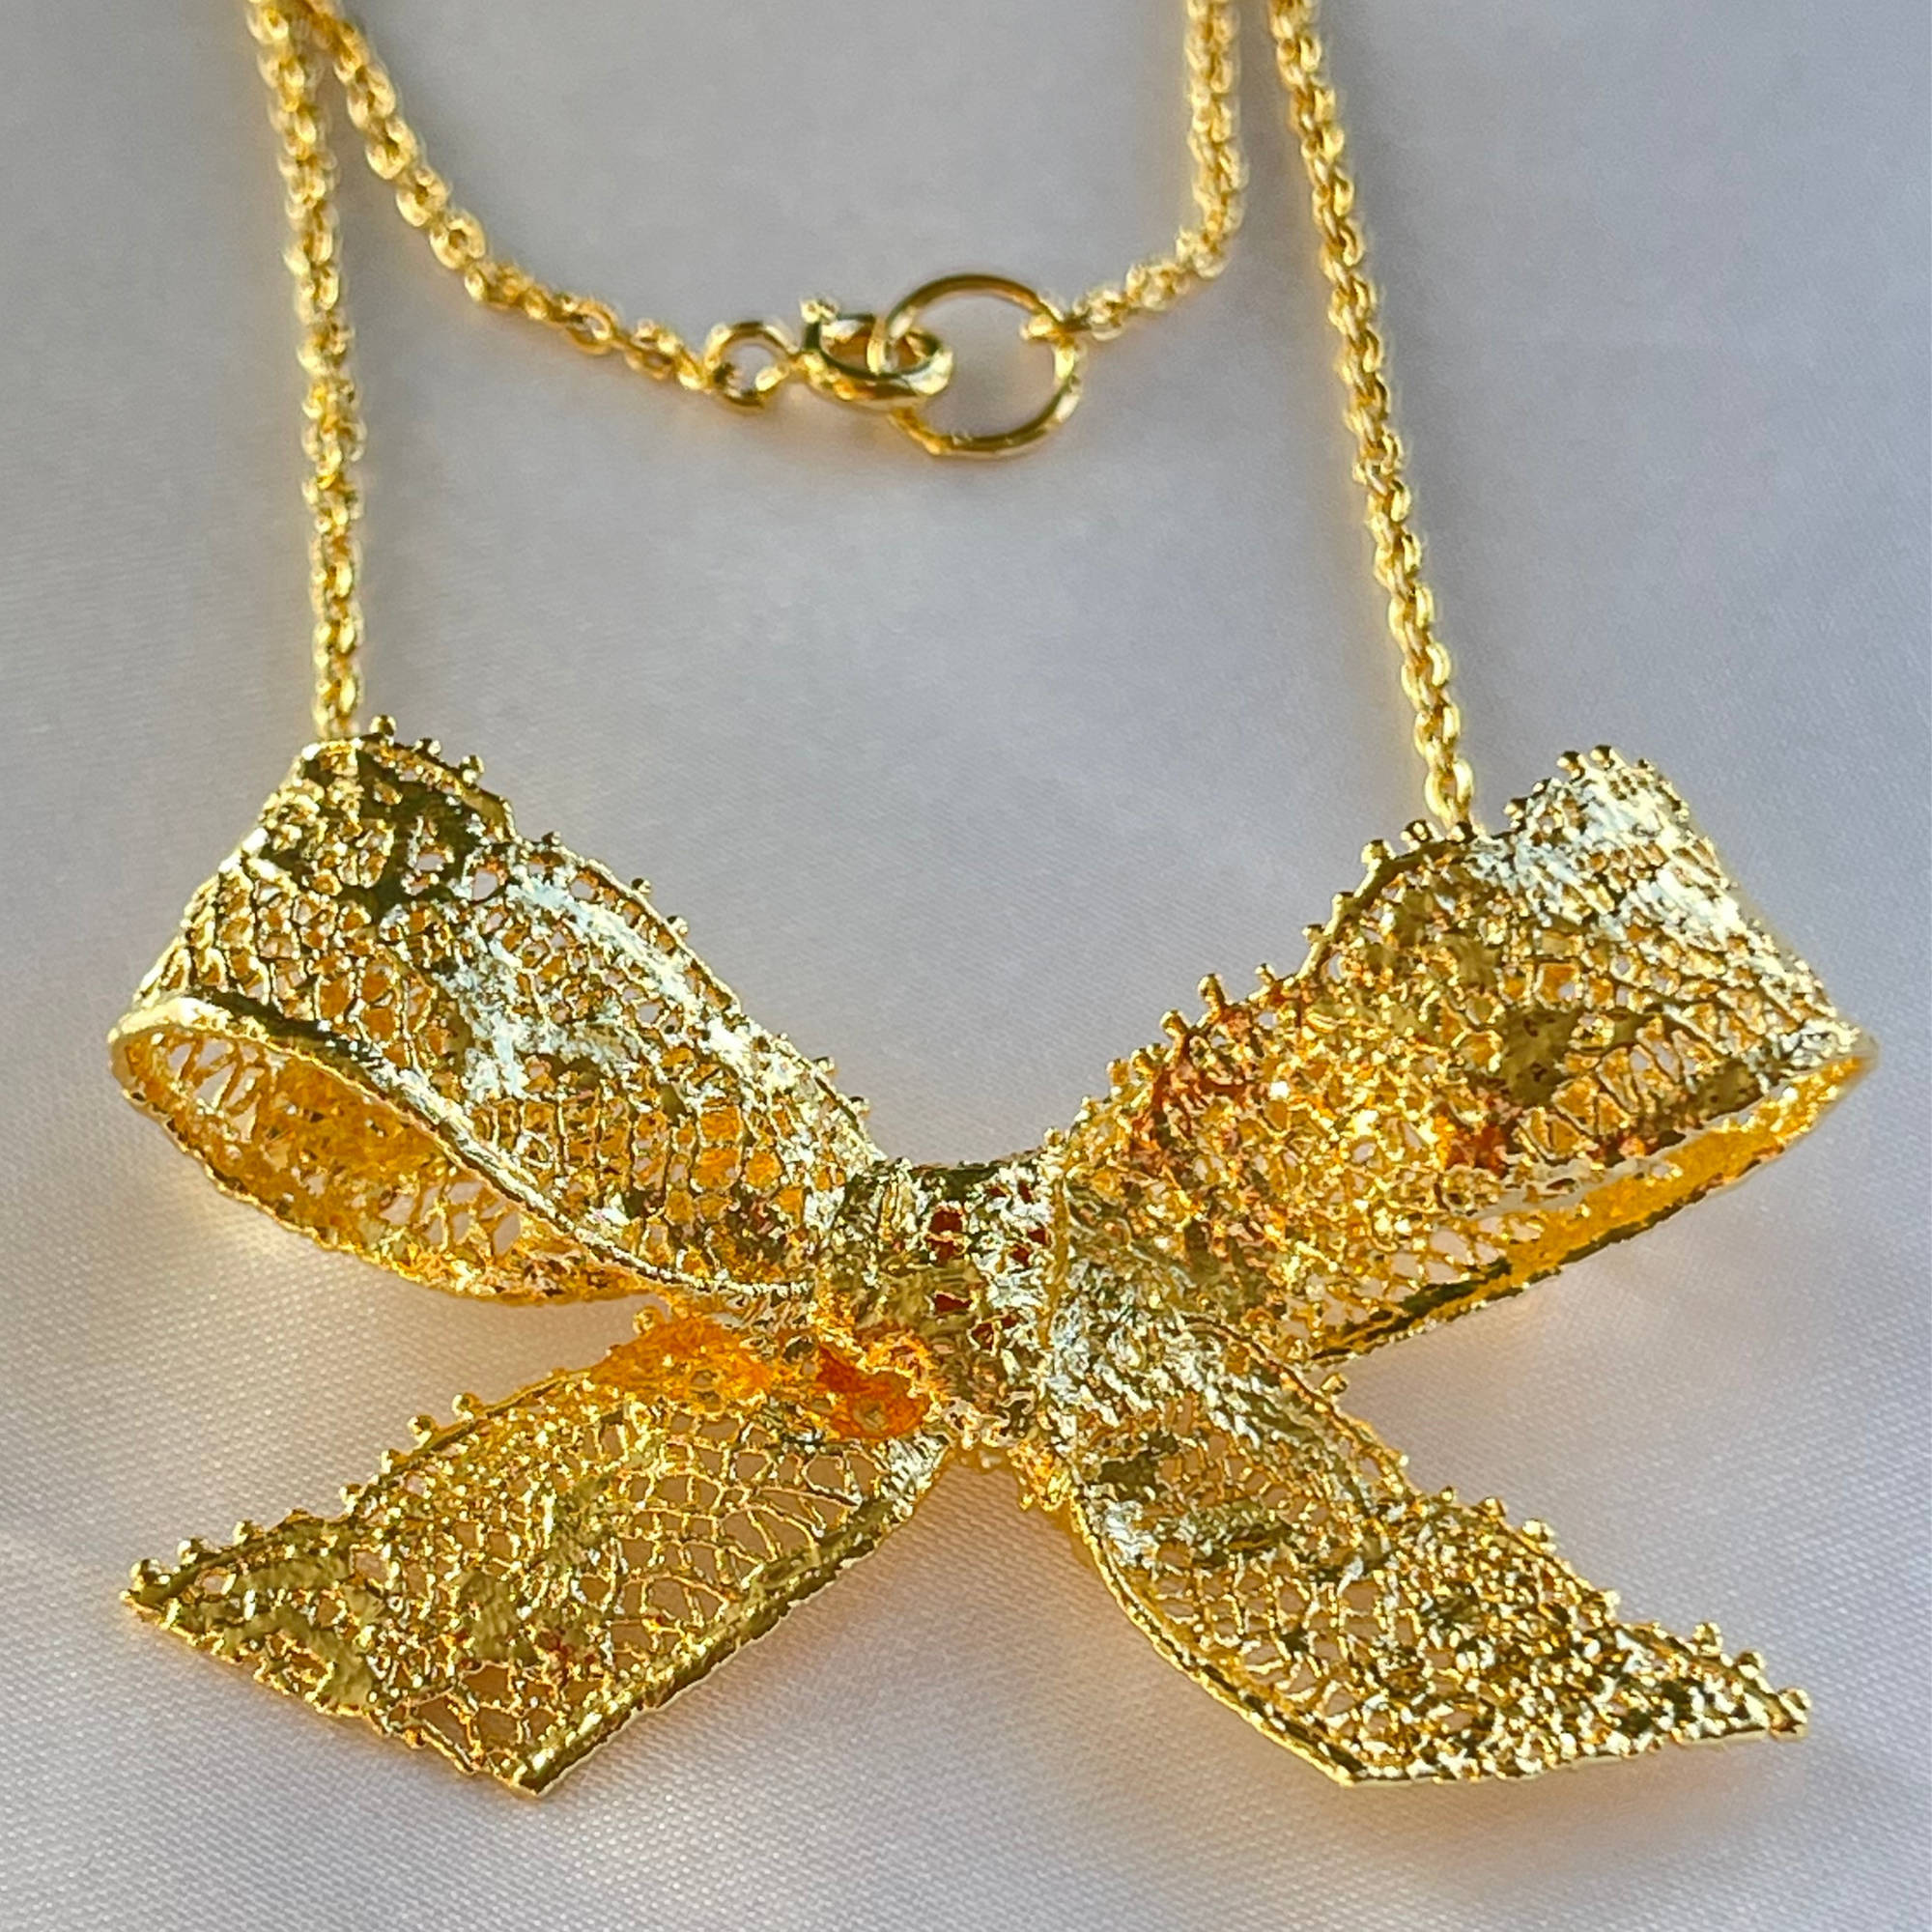 Gift set Micheline lace bow necklace and Millie lace earrings in 24k gold.